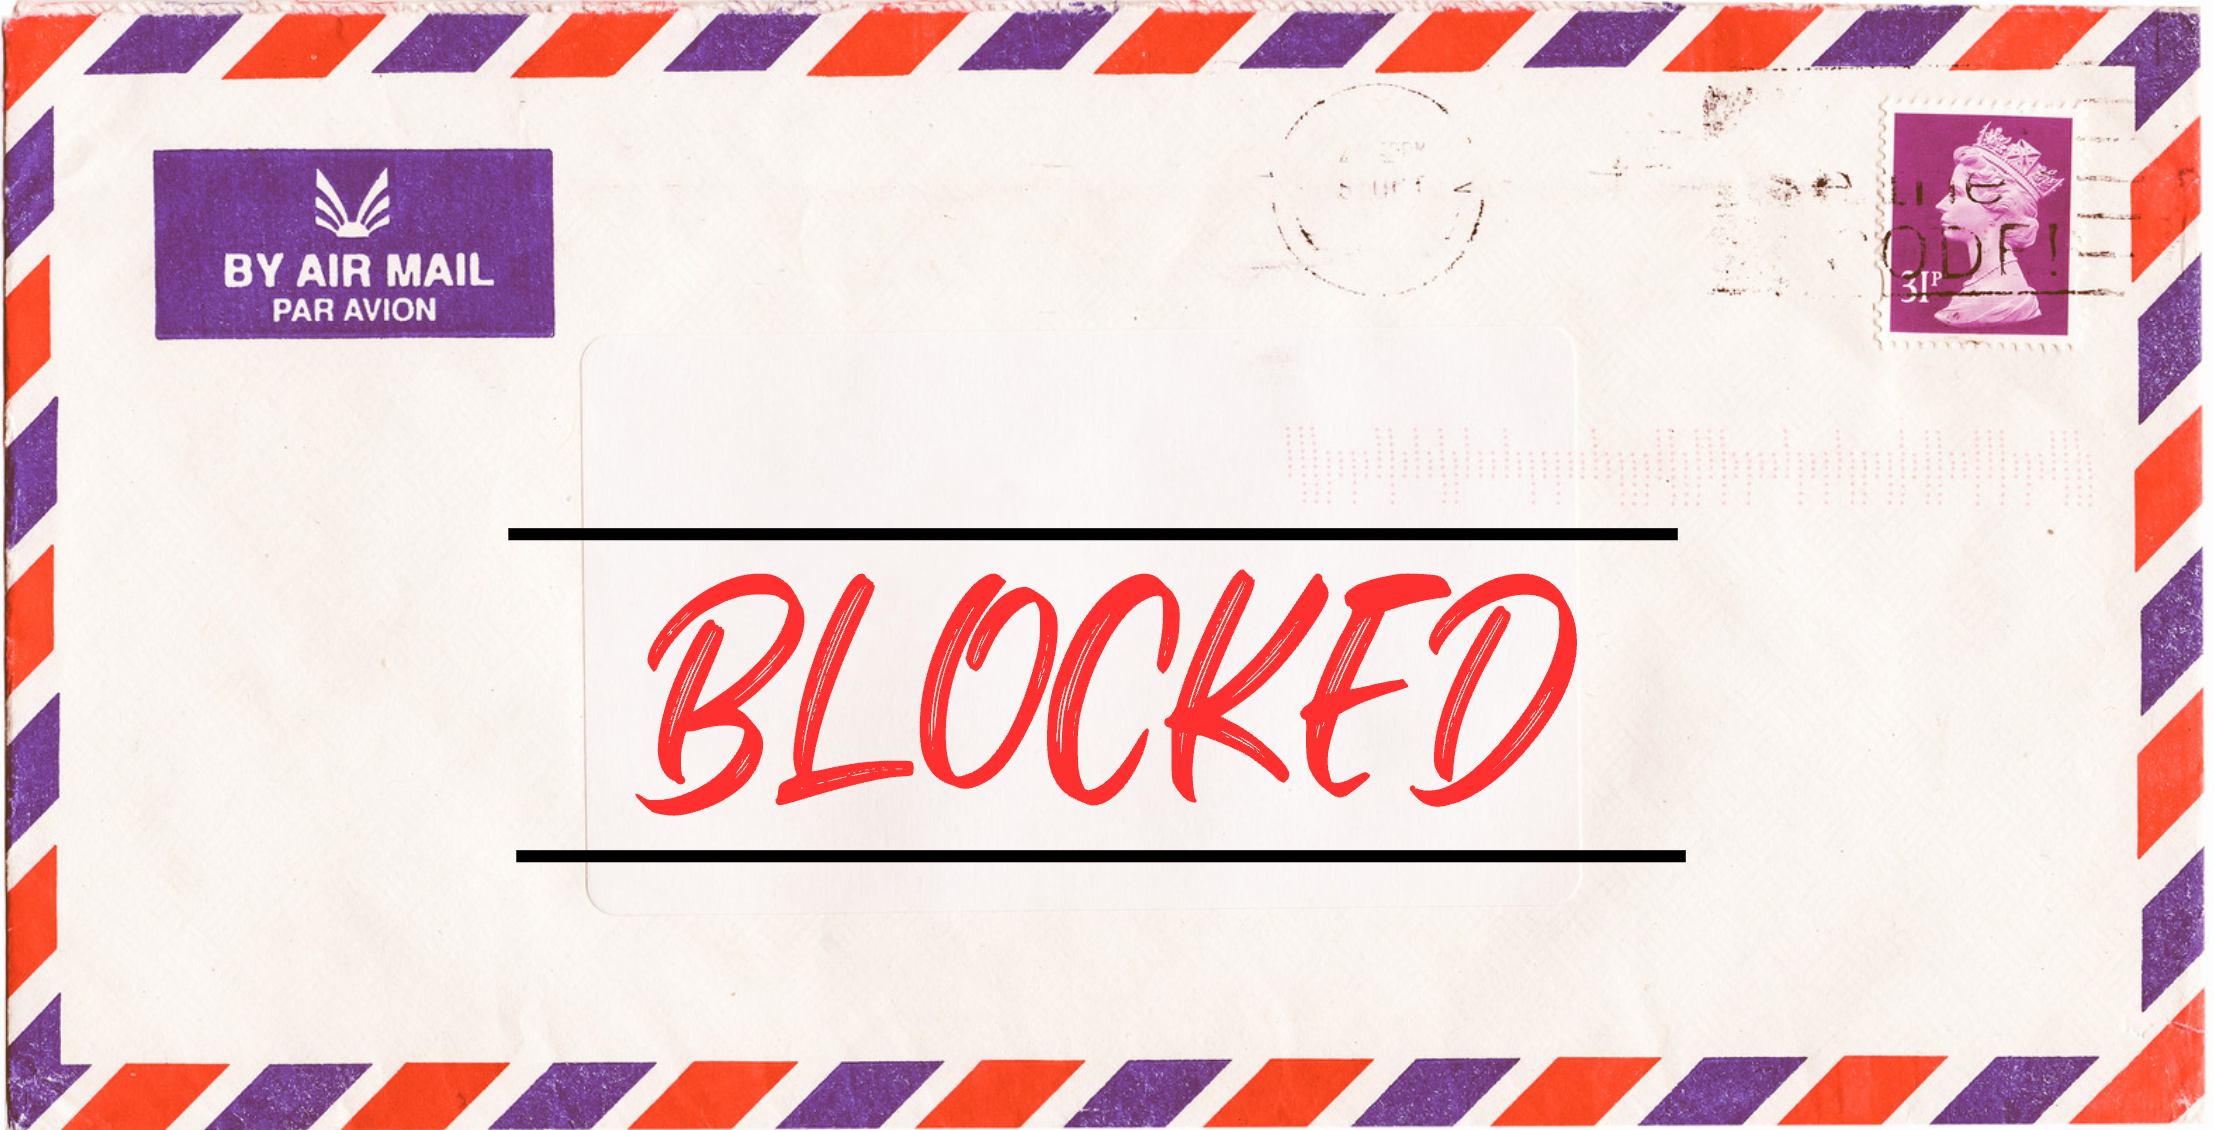 My Mailman Wrote “blocked” on My Mail. Why?